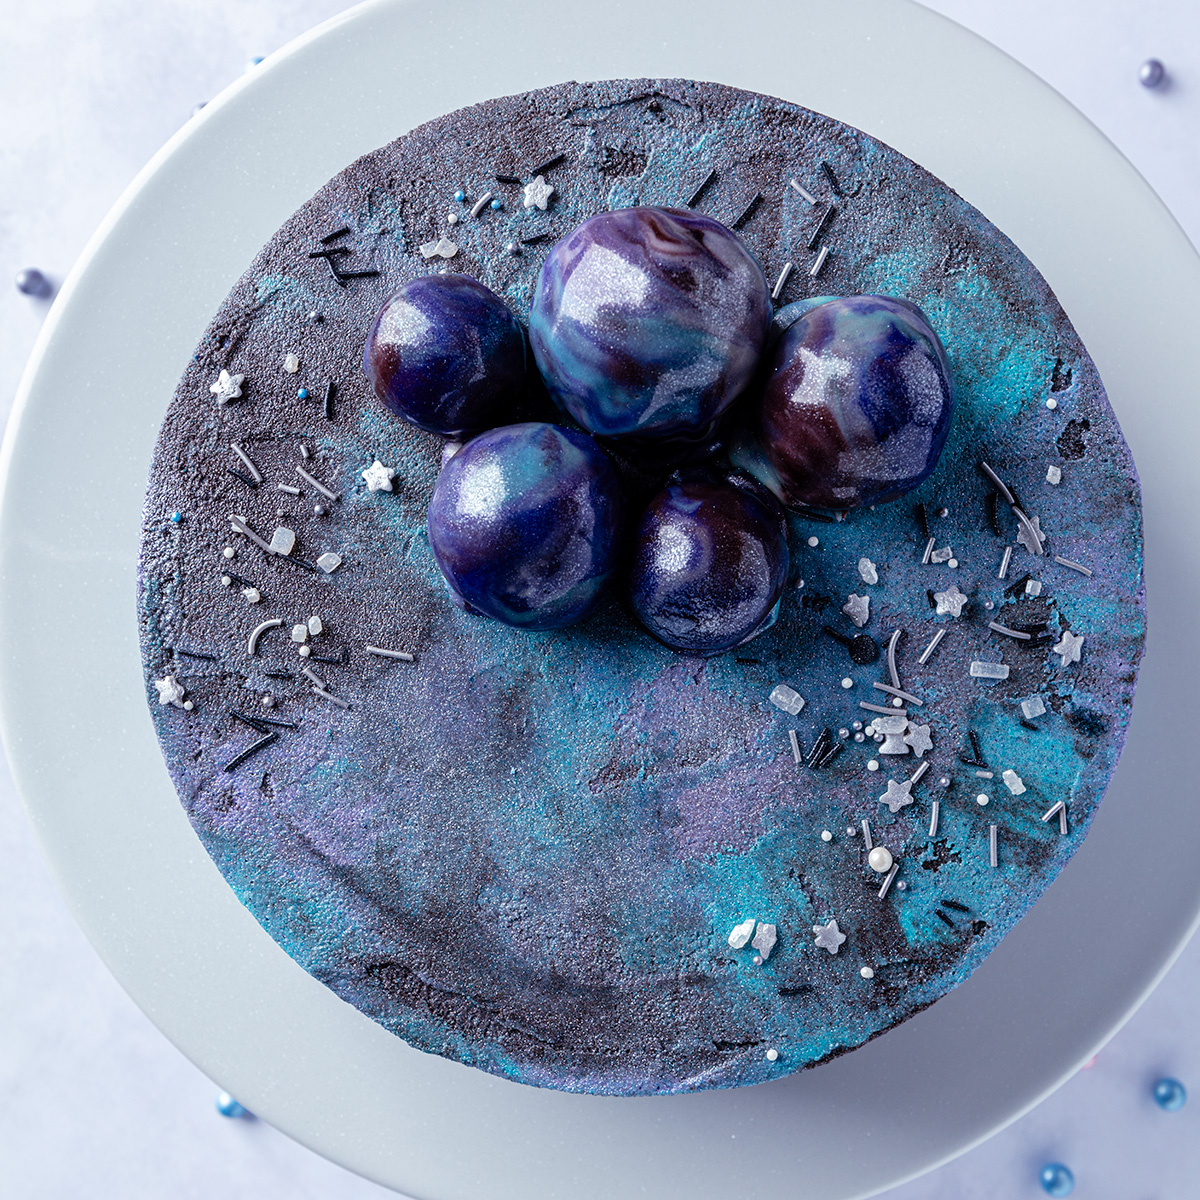 a galaxy cake with asteroids on top of the cake and moons and stars sprinkles.